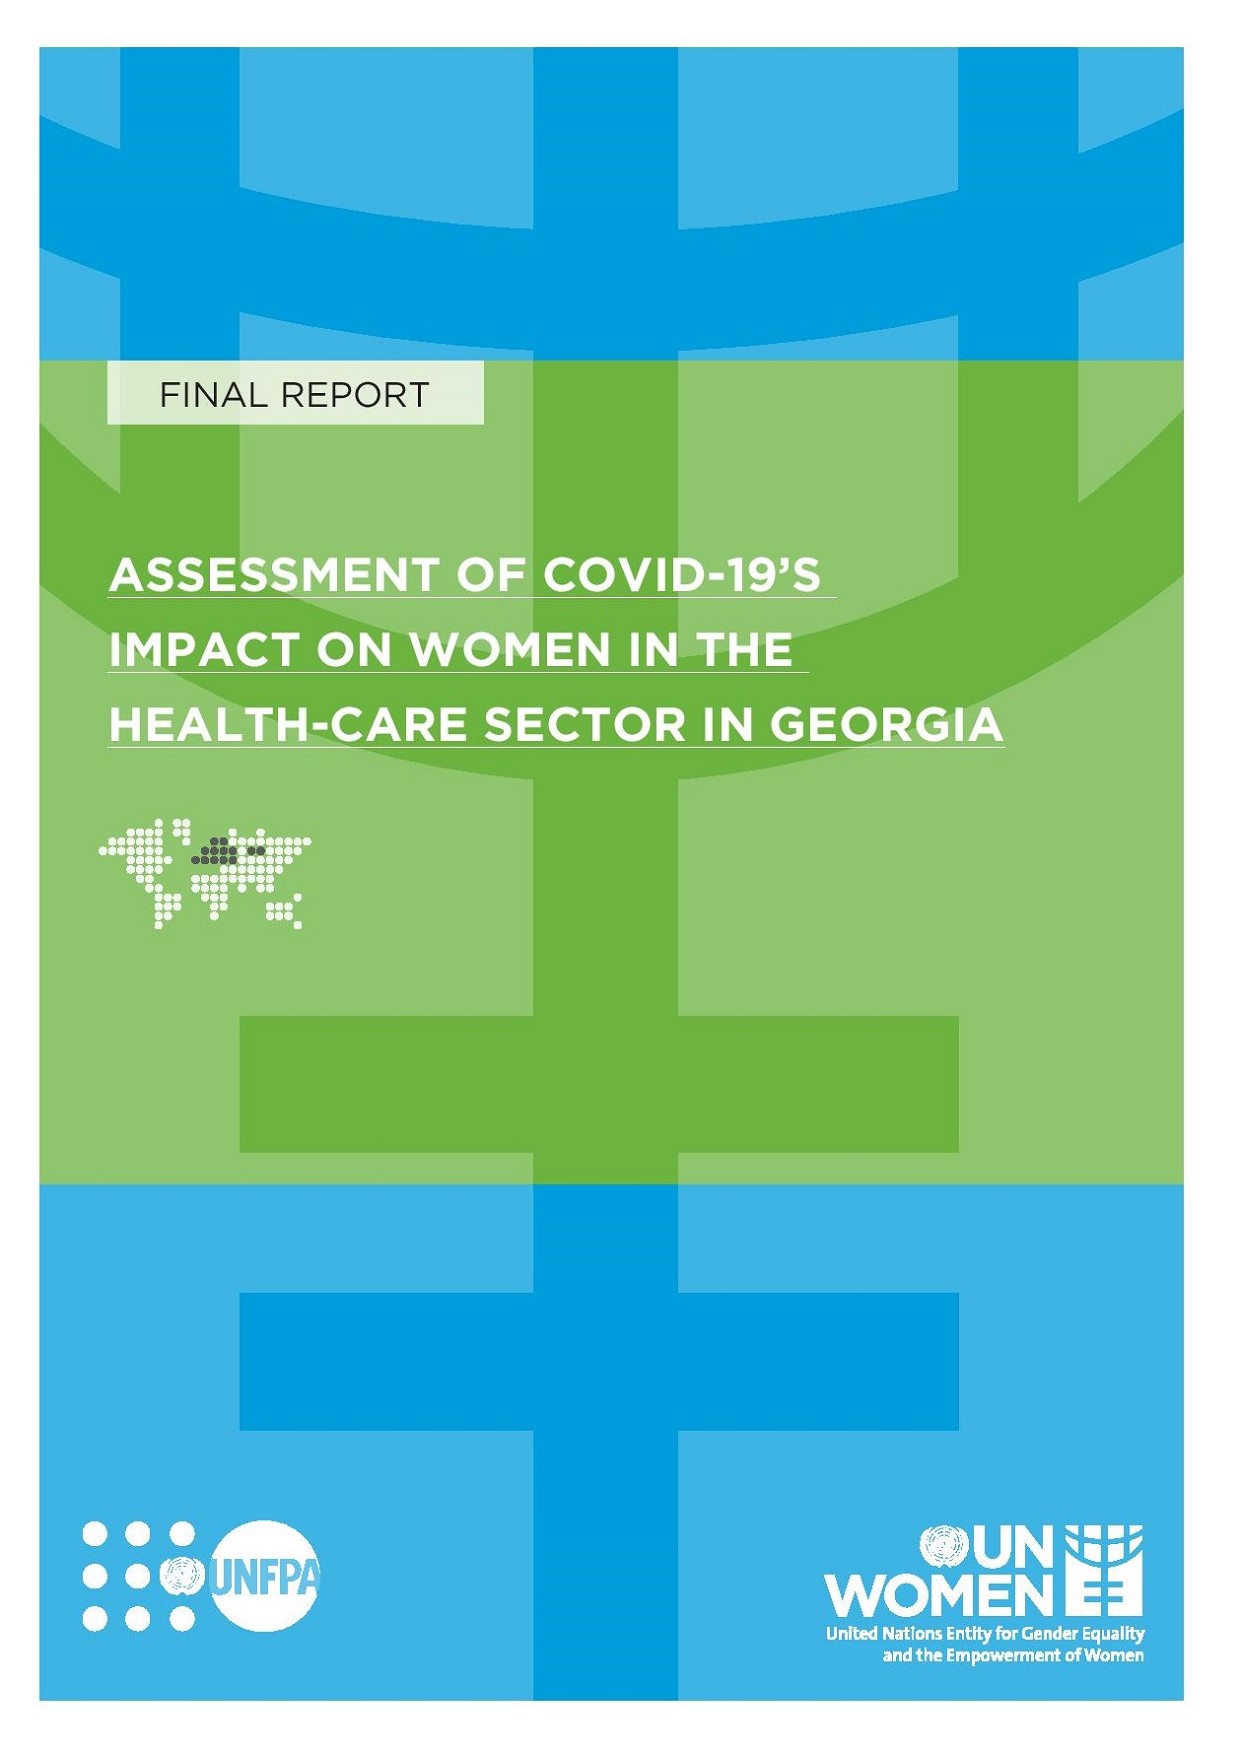 Assessment of Covid-19’s Impact on Women Employed in the Health-Care Sector in Georgia